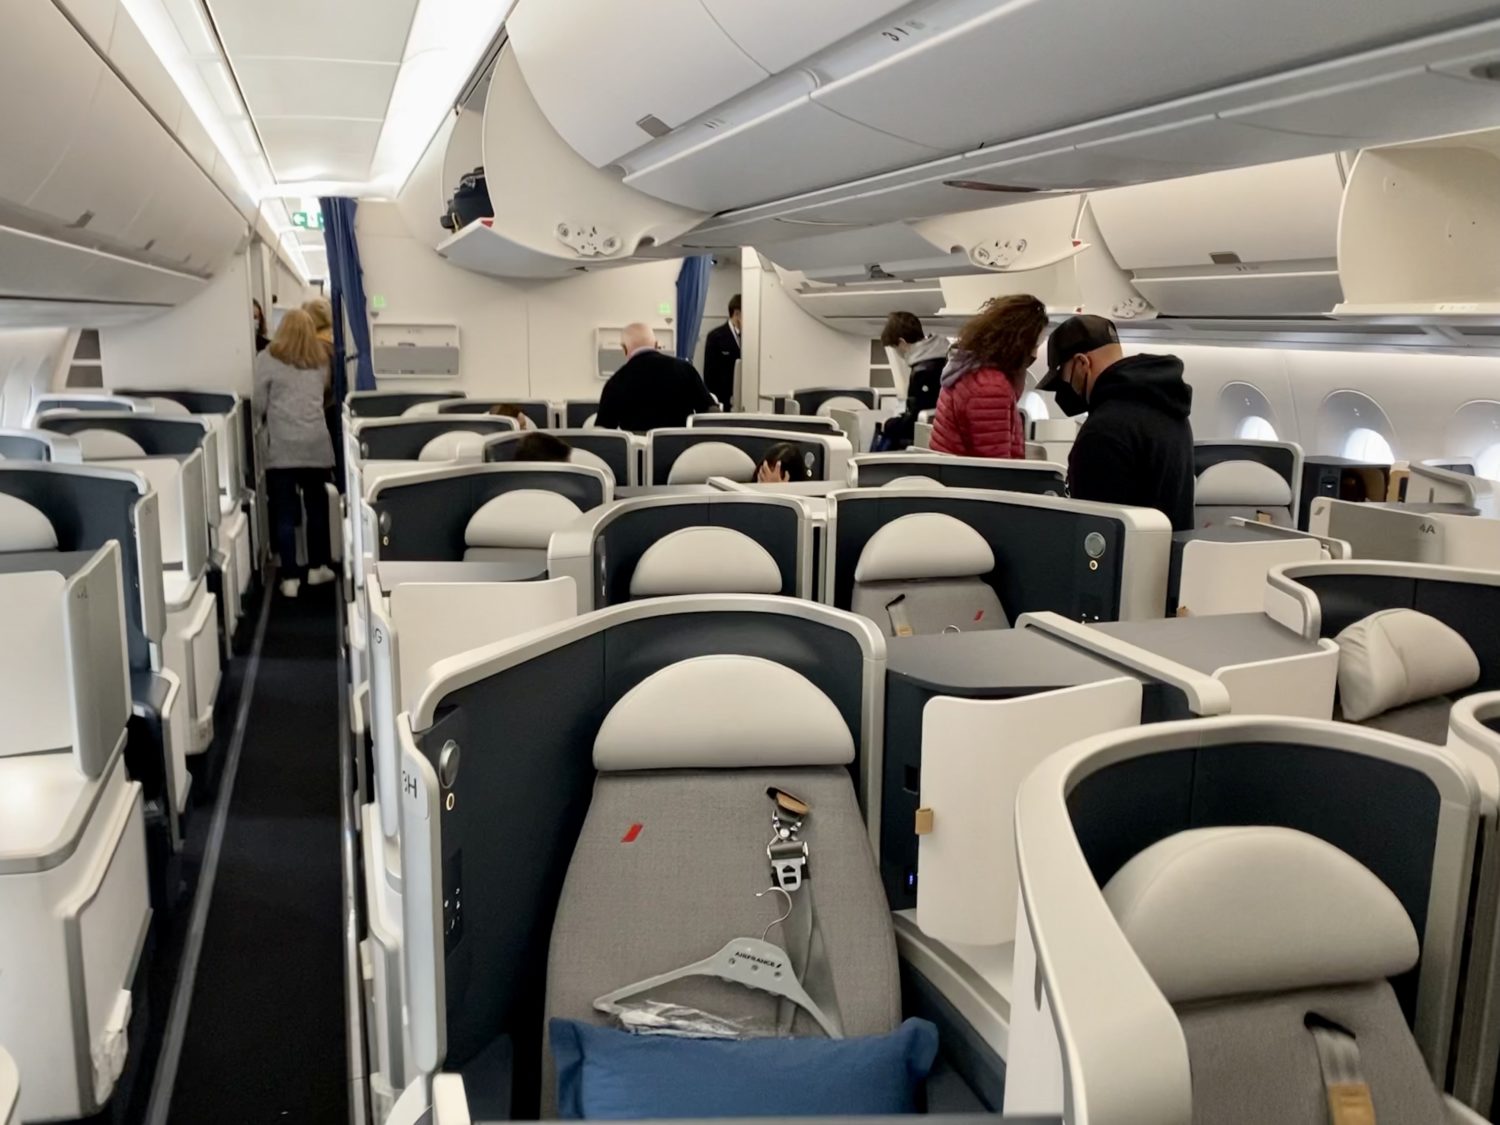 air france business class cabin  20% Bonus Transferring Capital One Miles to British Airways, Air France/KLM &#8211; Thrifty Traveler air france business class cabin scaled